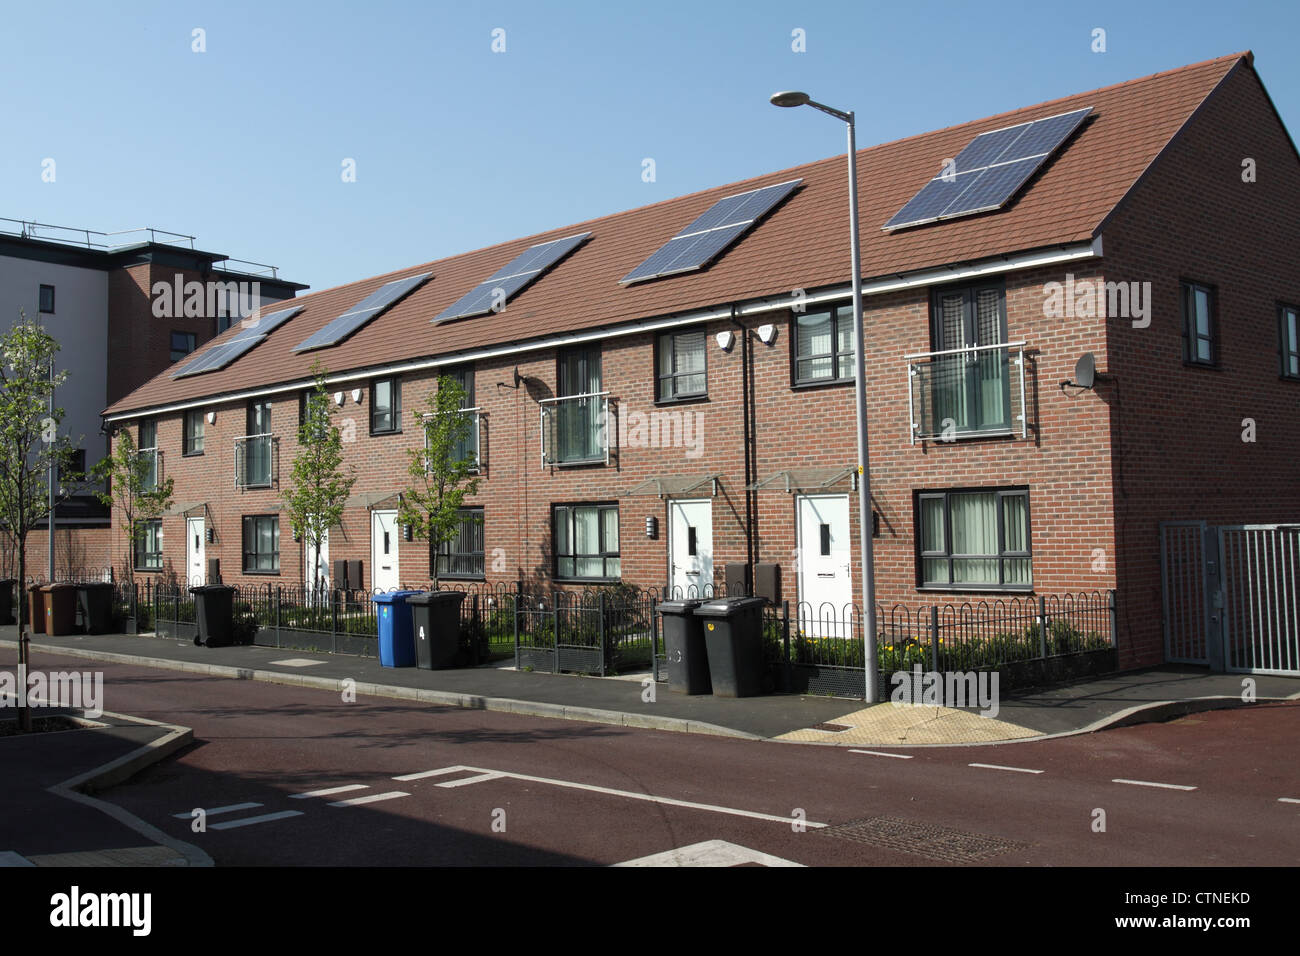 Urban Housing Renewal in Salford, Manchester, Low energy sustainable buildings with high insulation and solar panels. Stock Photo